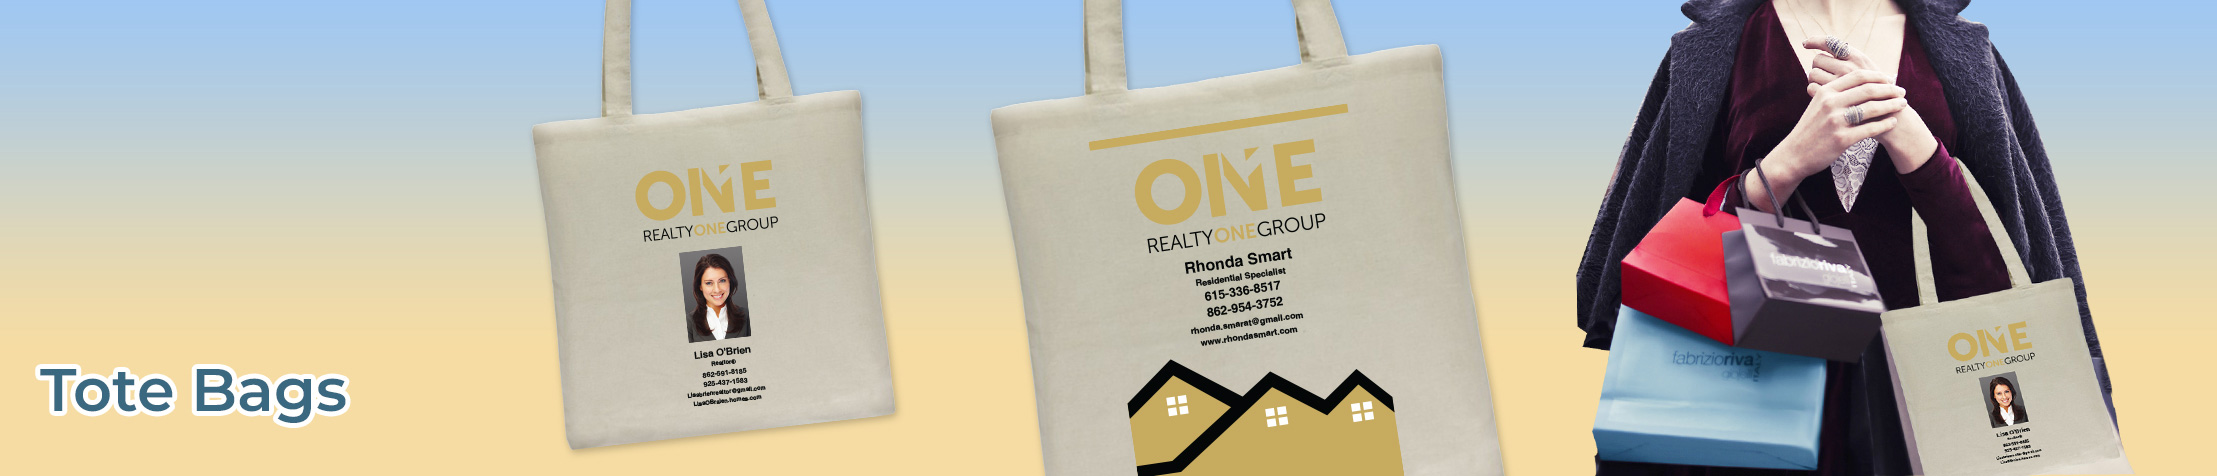 Realty One Group Real Estate Tote Bags - Realty One Group  personalized realtor promotional products | BestPrintBuy.com